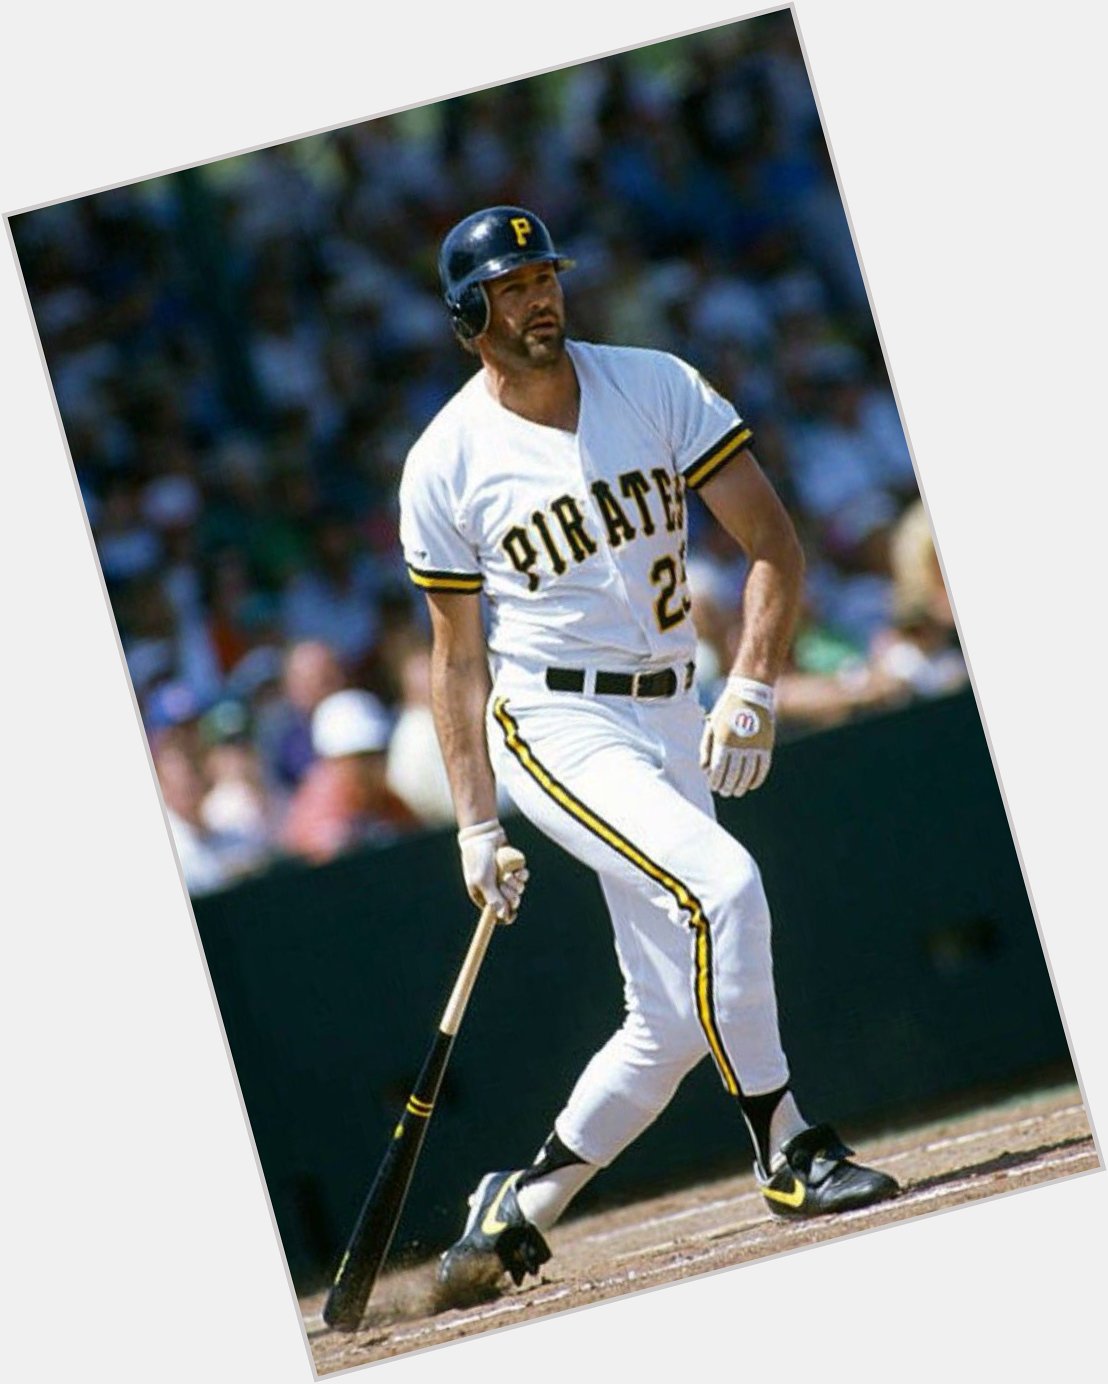 Happy birthday number 64  to former Pirates great Kirk Gibson 